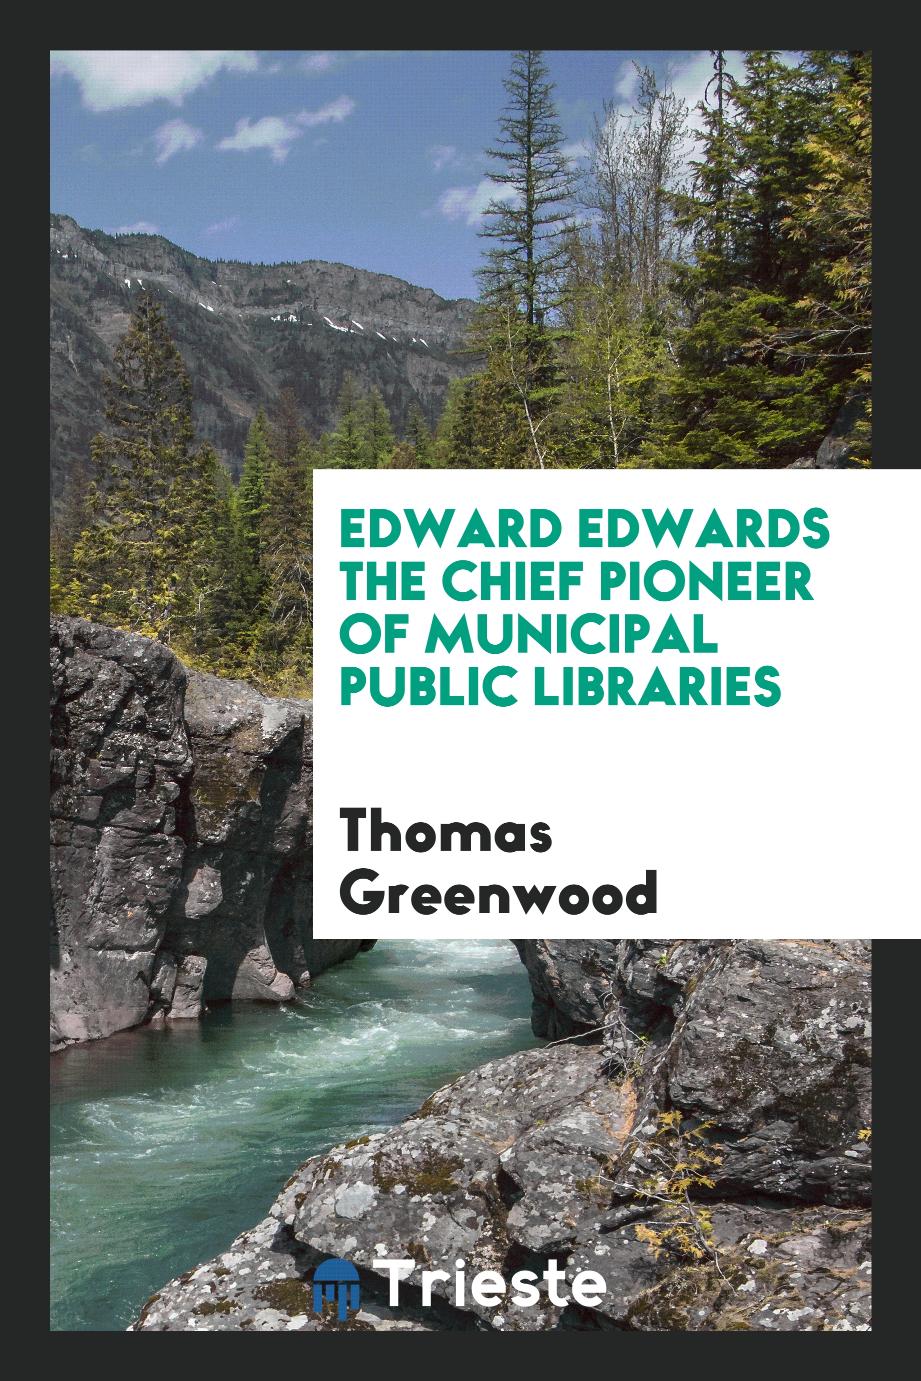 Edward Edwards the chief pioneer of Municipal Public Libraries